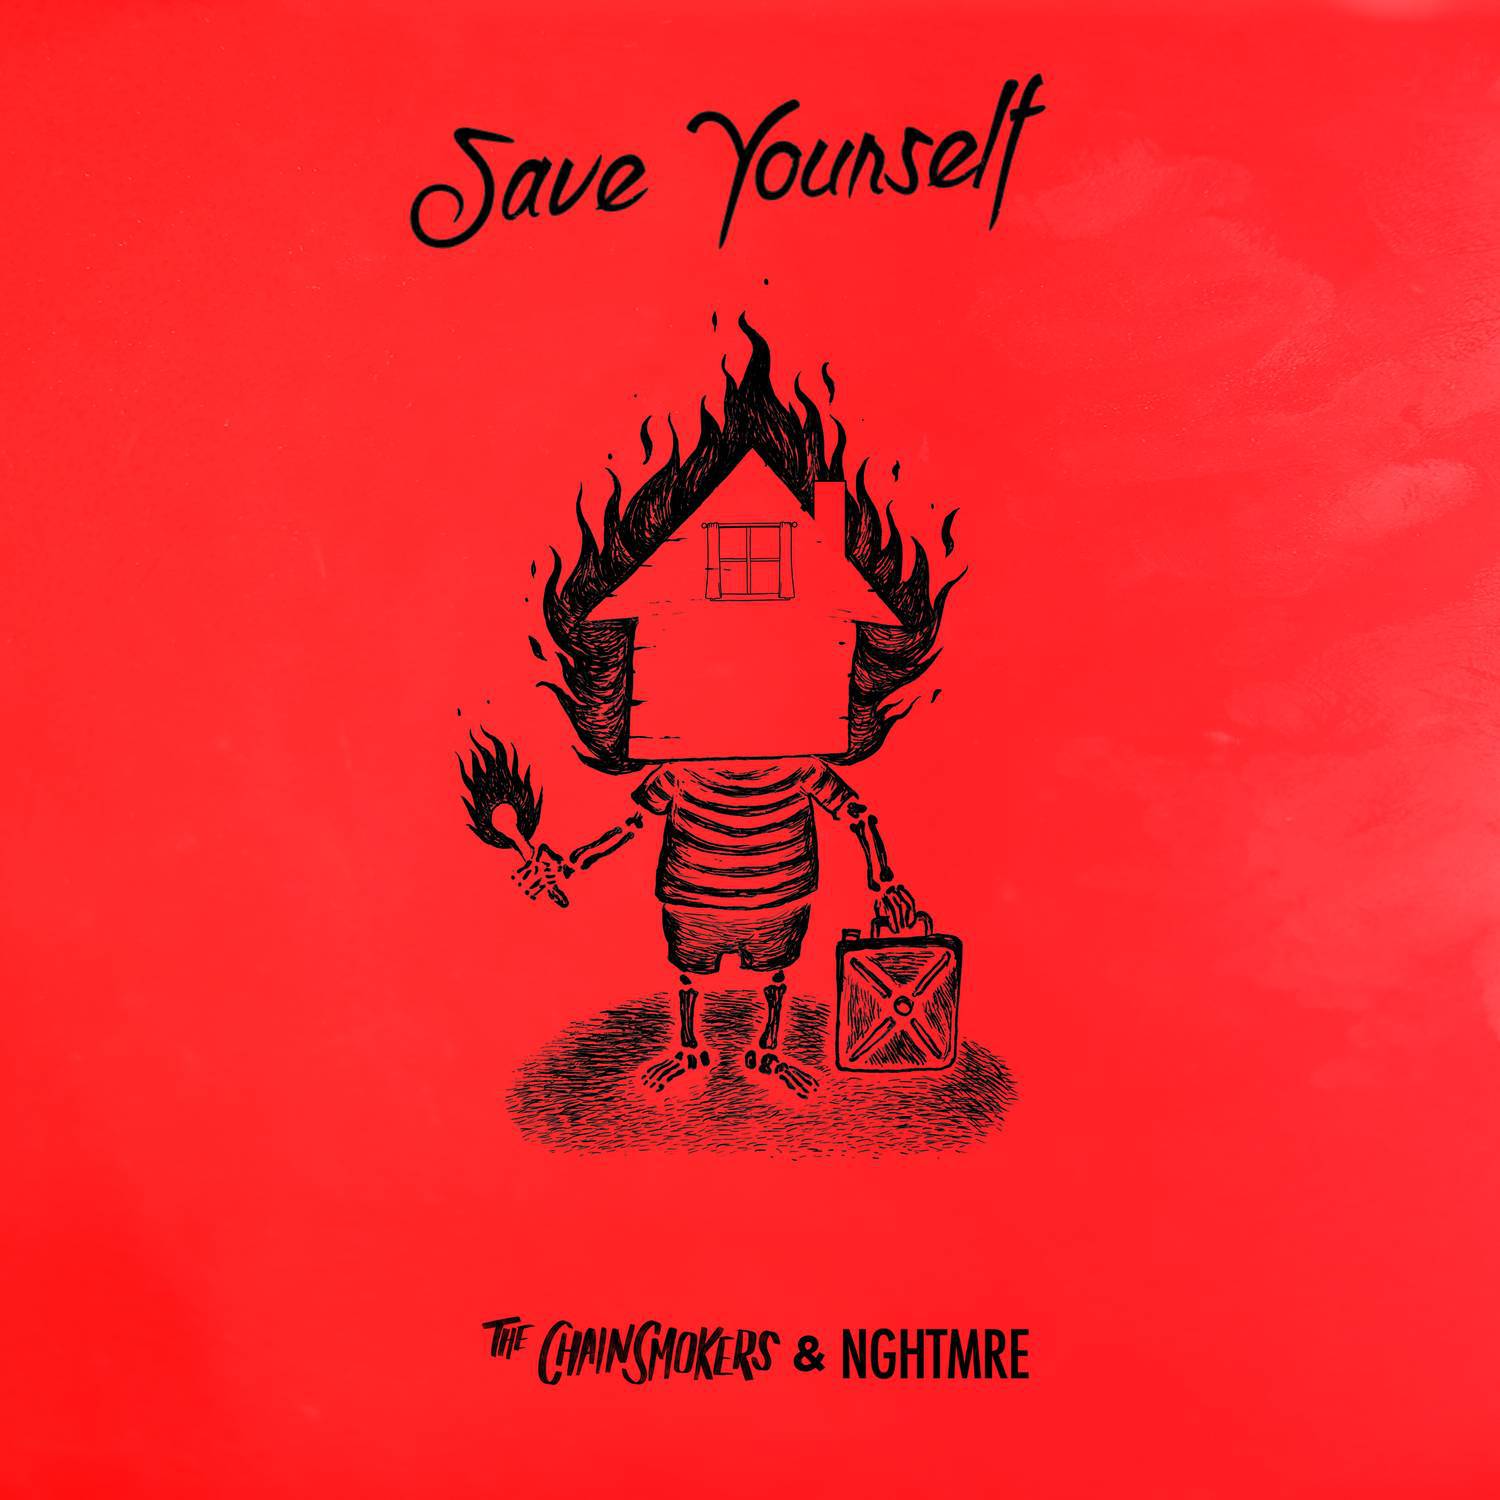 Save Yourself歌词 歌手The Chainsmokers / NGHTMRE-专辑Sick Boy...Save Yourself-单曲《Save Yourself》LRC歌词下载